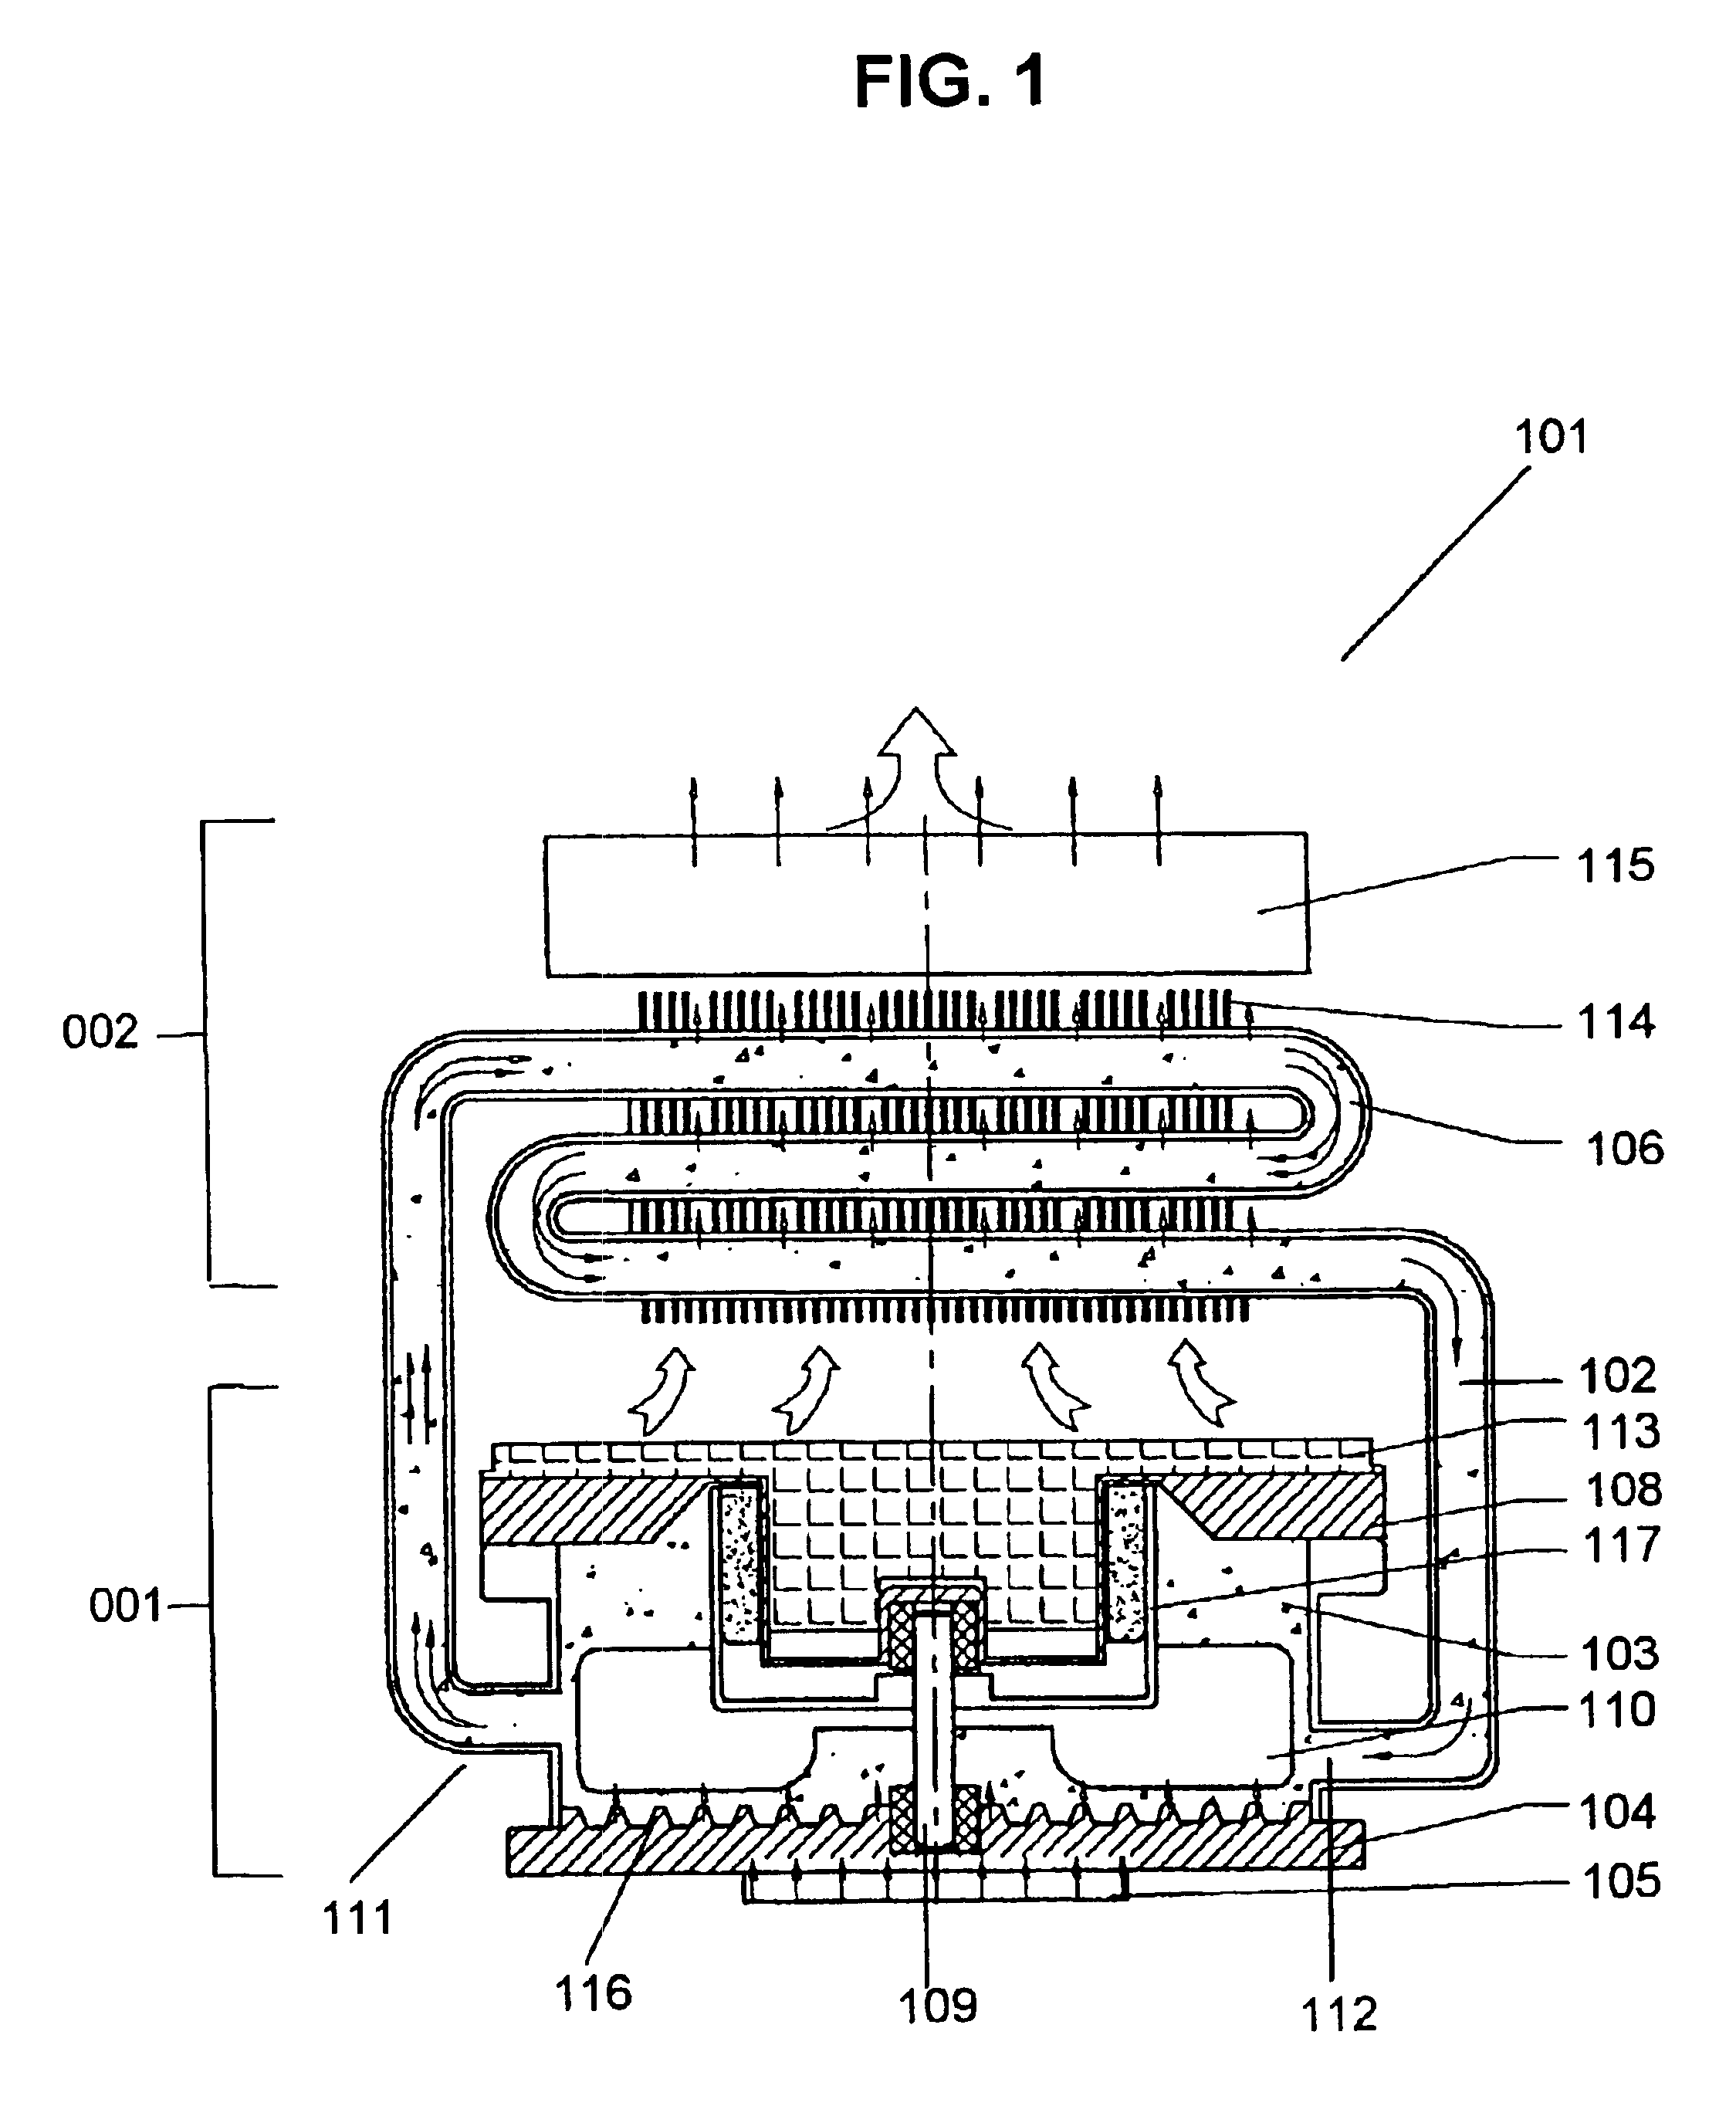 Integrated fluid cooling system for electronic components